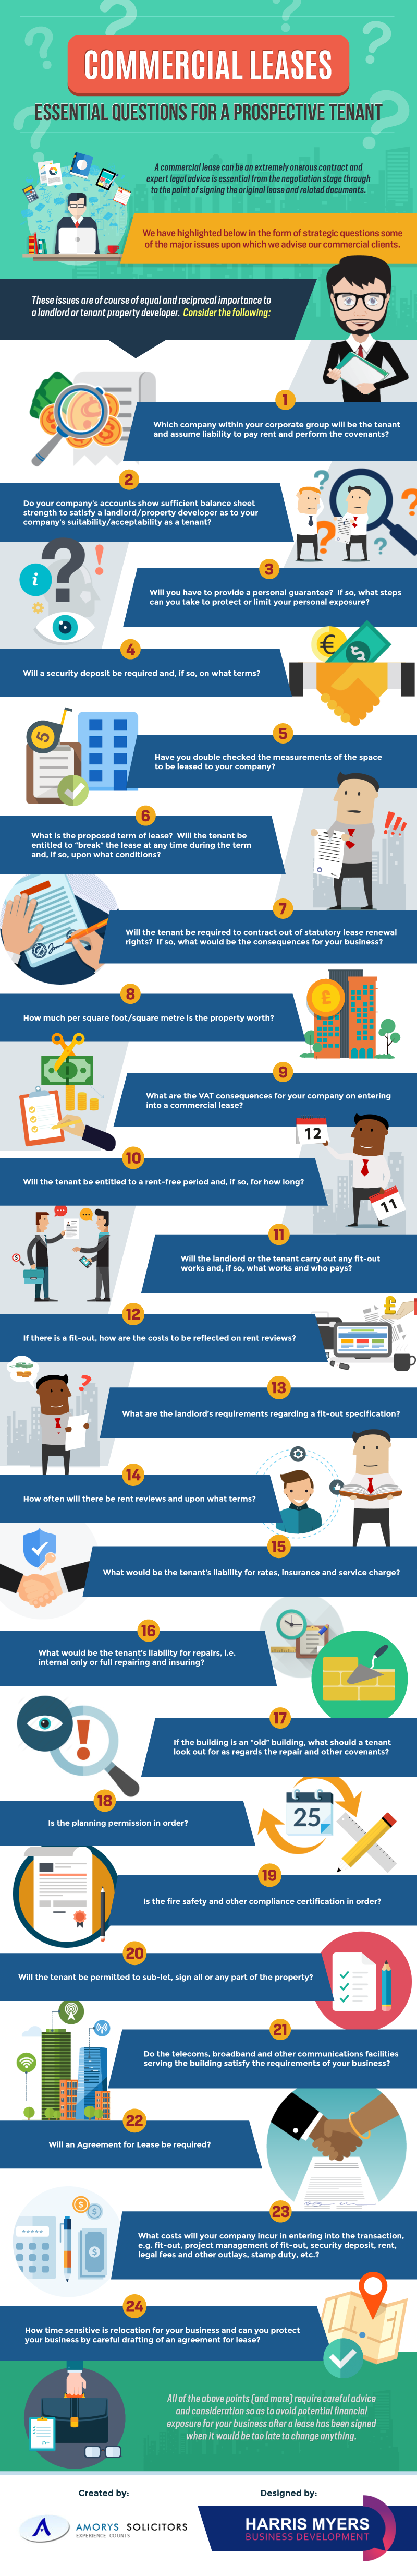 Commercial Leases: Essential Questions For A Prospective Tenant #infographic